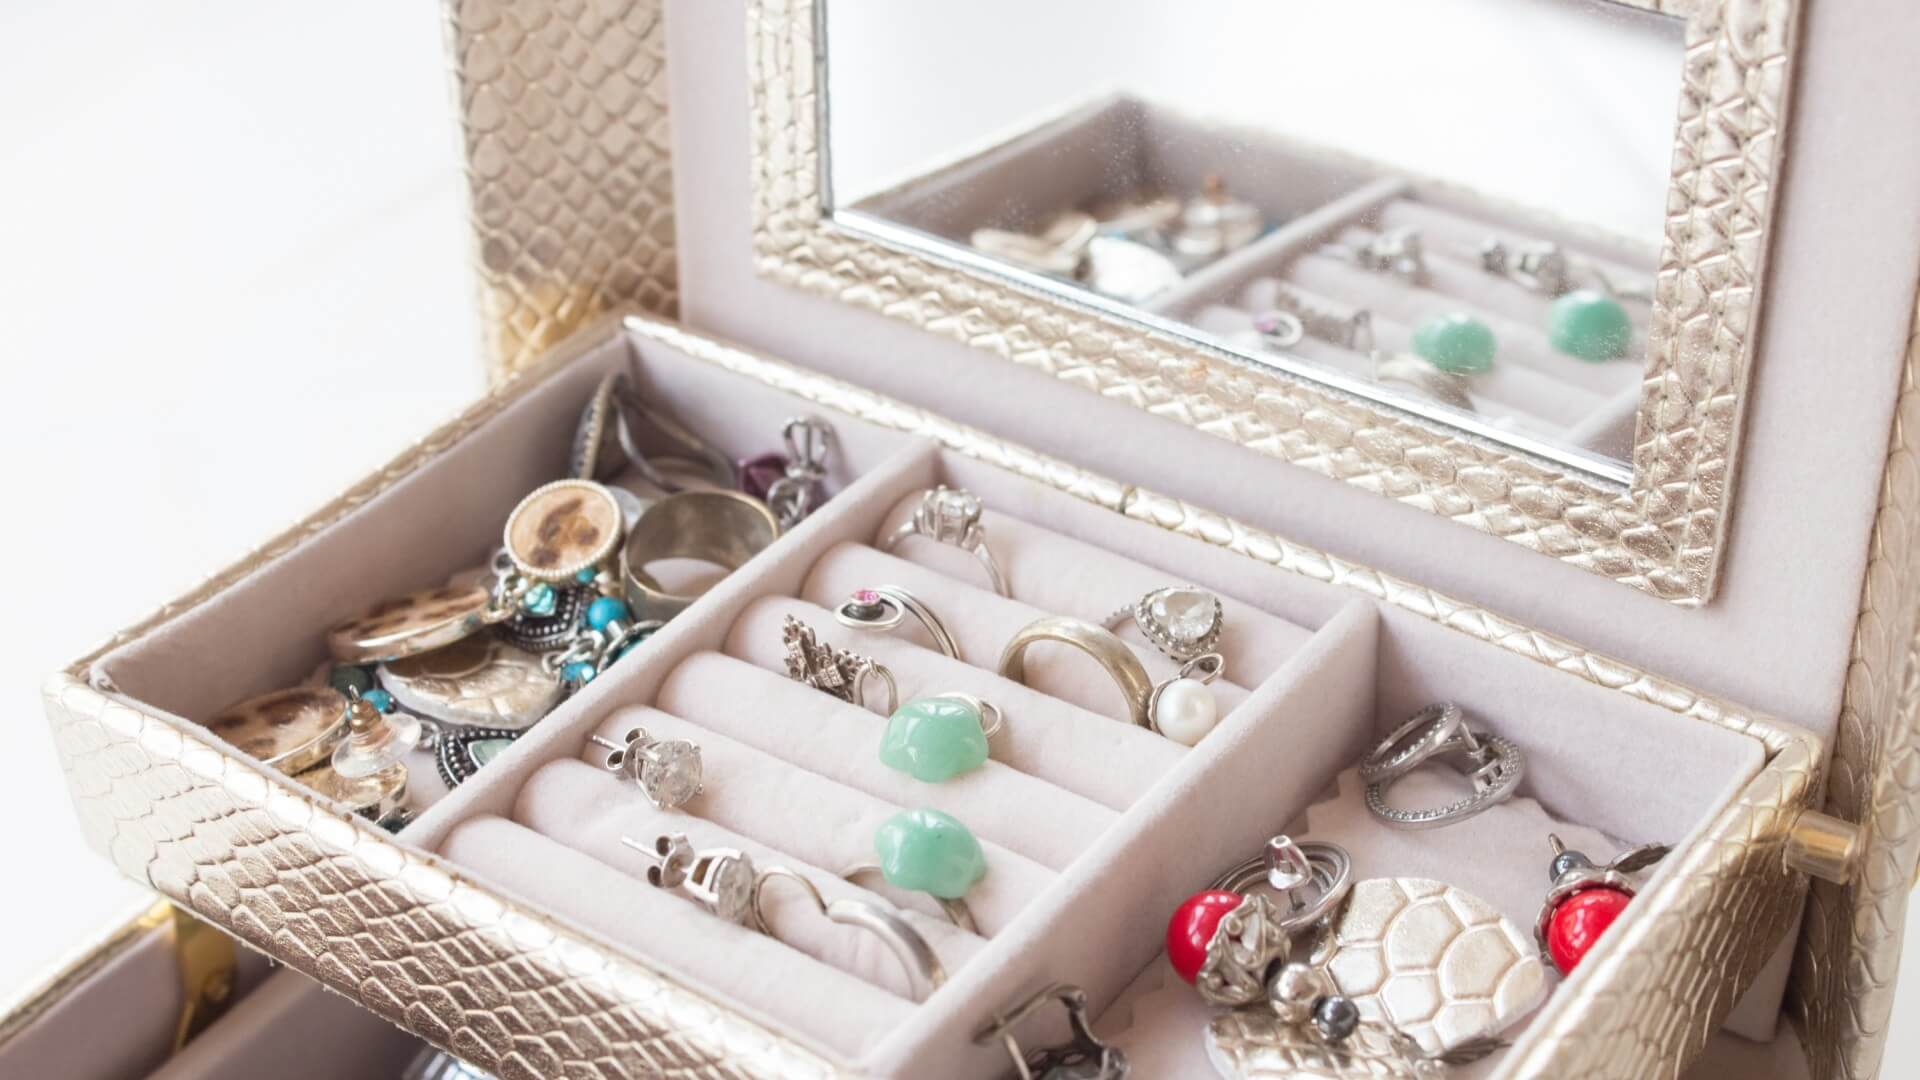 How to Store Jewelry: 11 Tips for Jewelry Storage